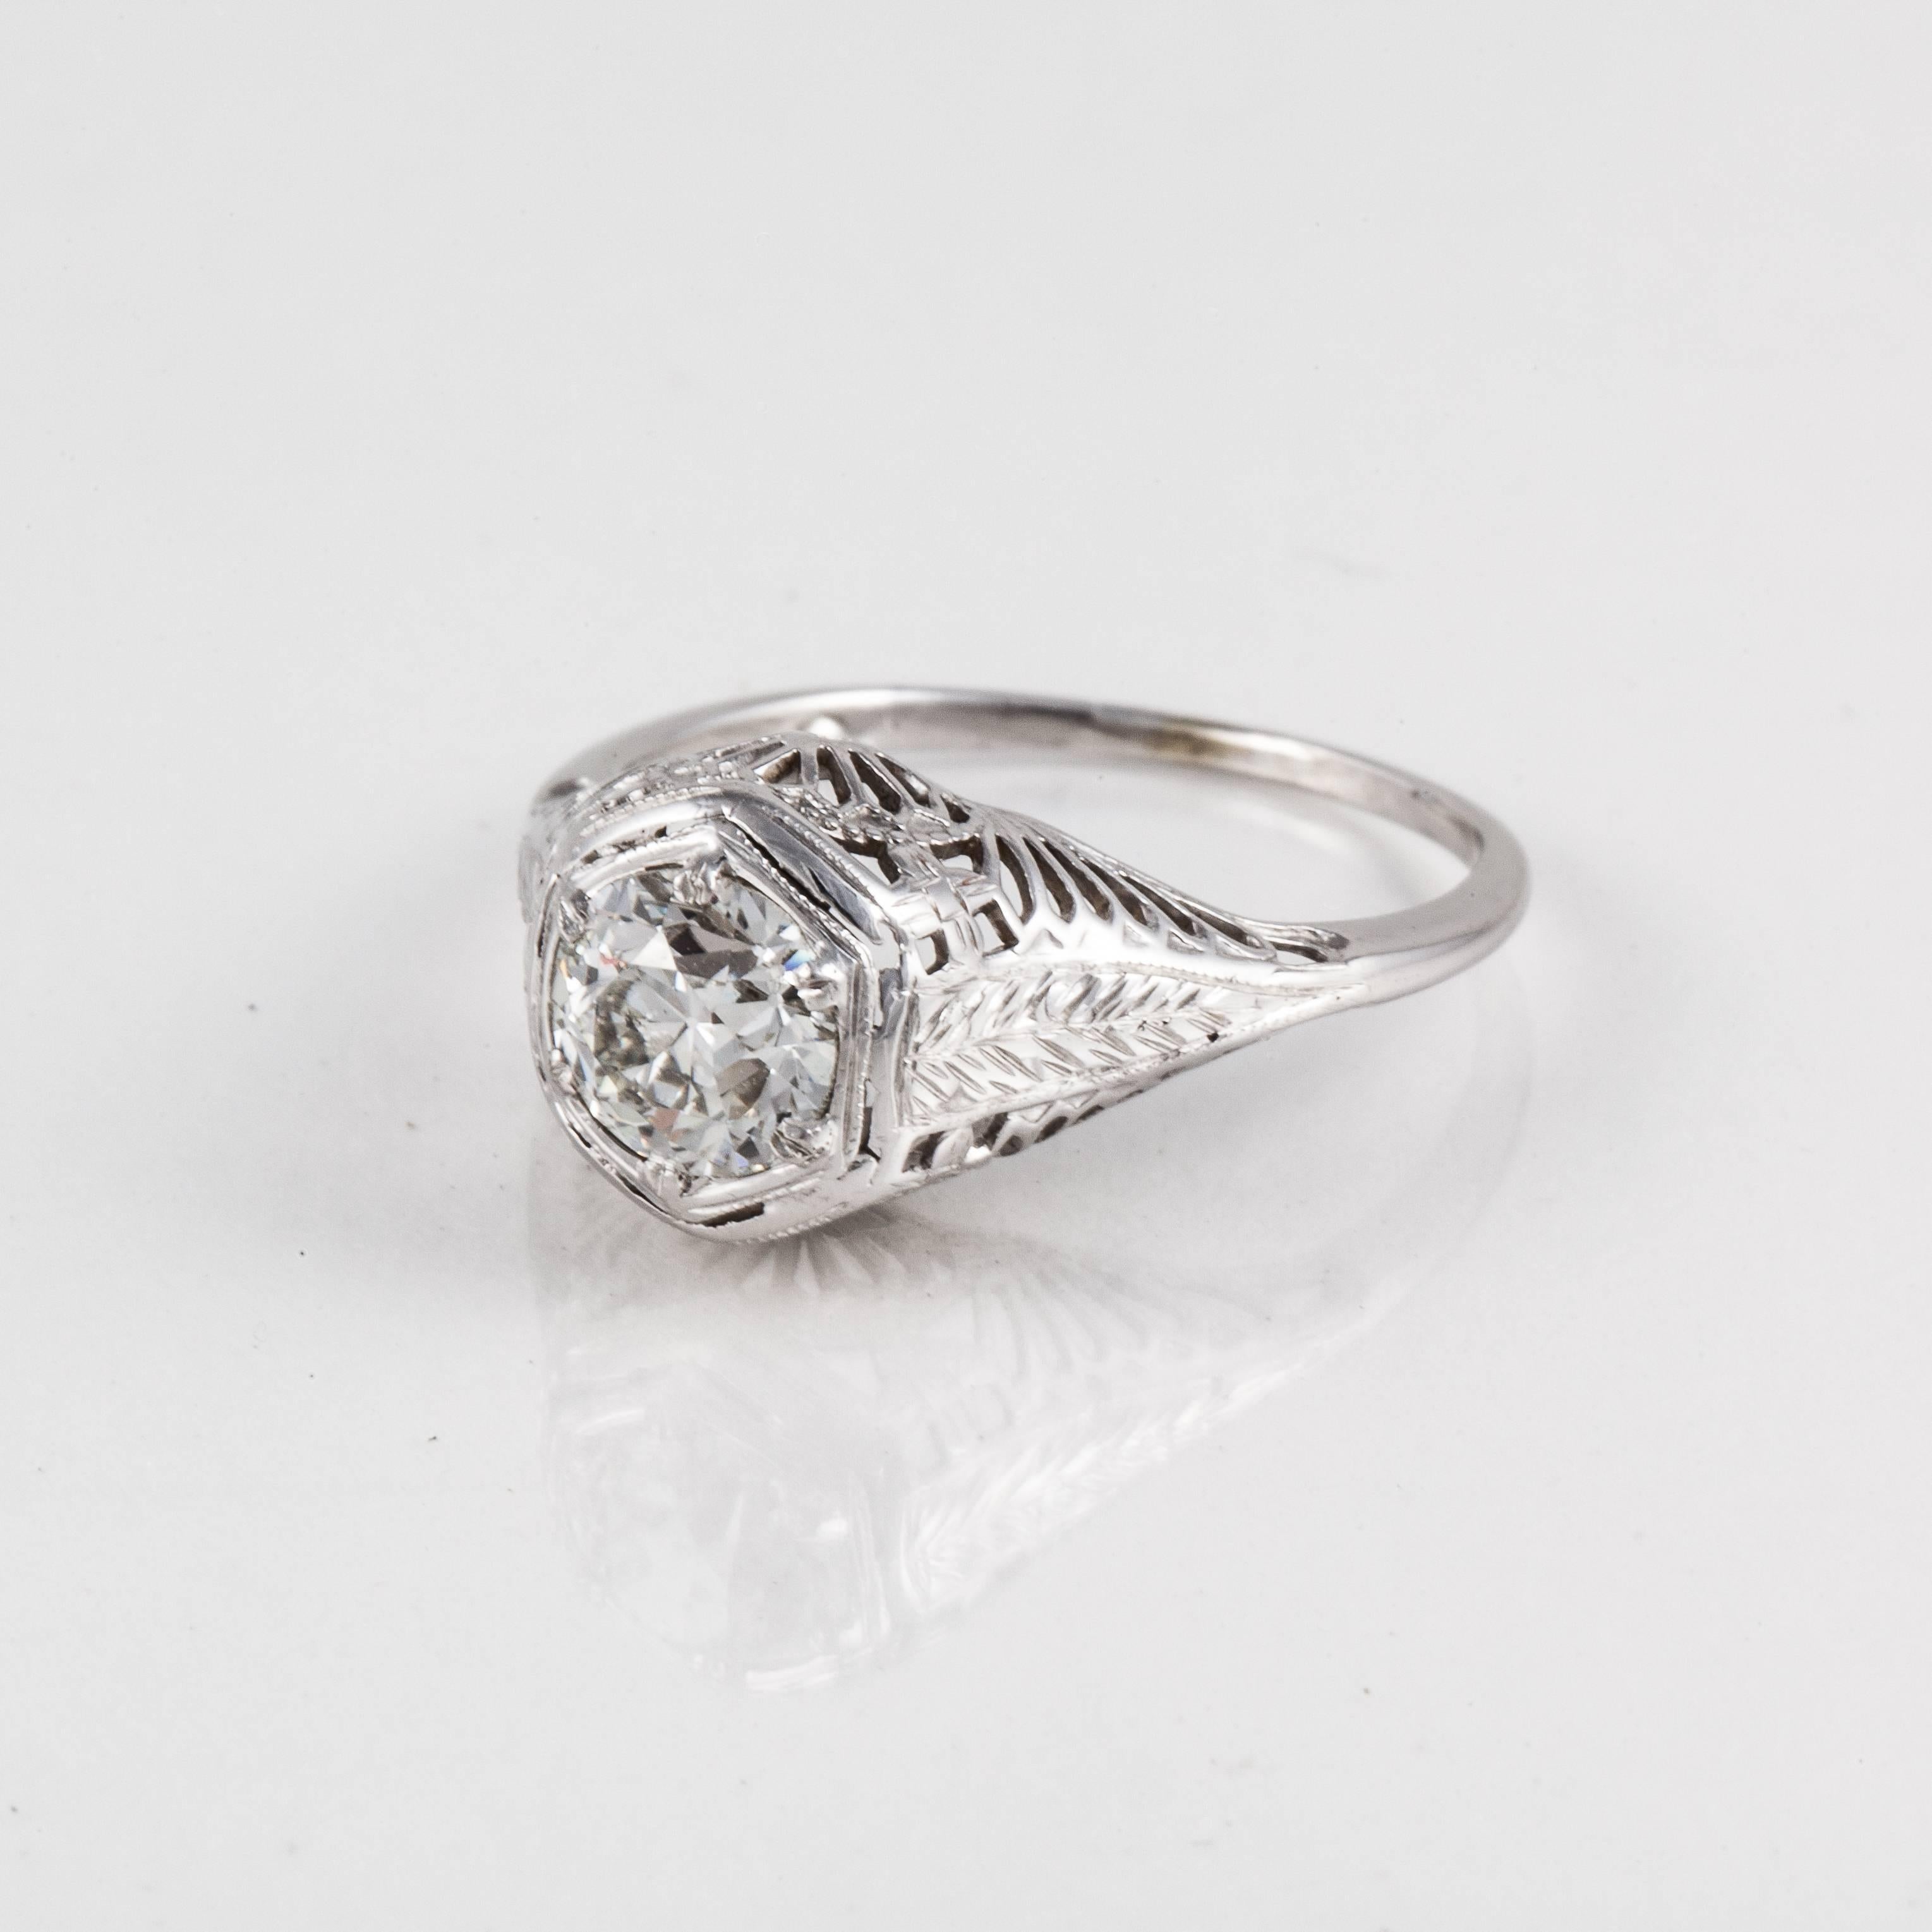 Art Deco filigree ring in 18K white gold featuring an Old European cut diamond, 0.80 carats, H color and SI2 clarity accompanied by a GIA report. Ring is currently a size 5 1/4 and may be resized. Presentation area is 1/2 inch by 3/8 of an inch and